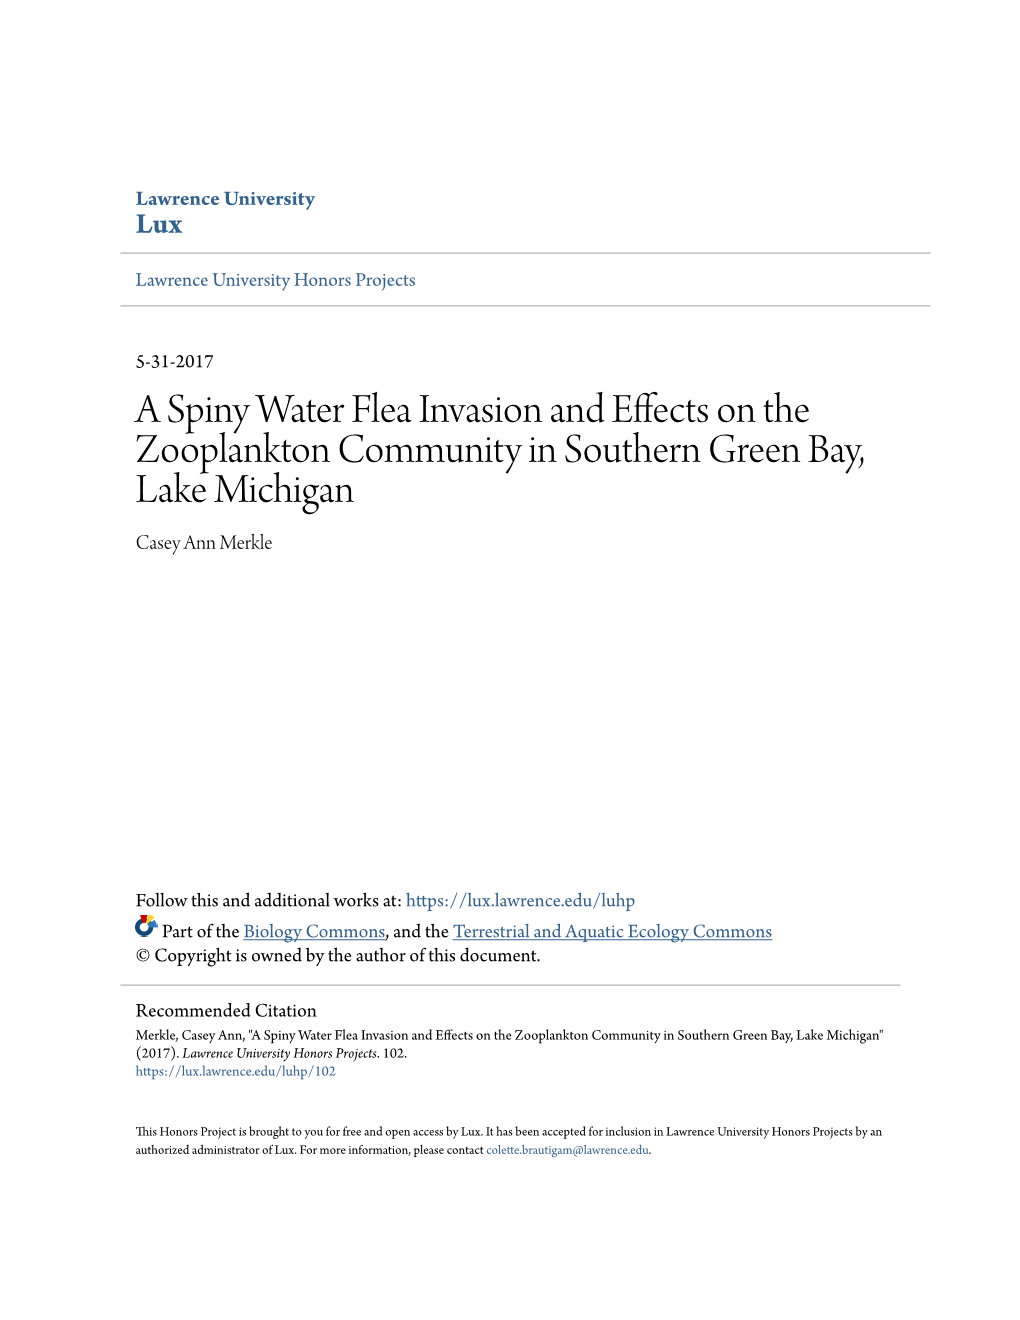 A Spiny Water Flea Invasion and Effects on the Zooplankton Community in Southern Green Bay, Lake Michigan Casey Ann Merkle